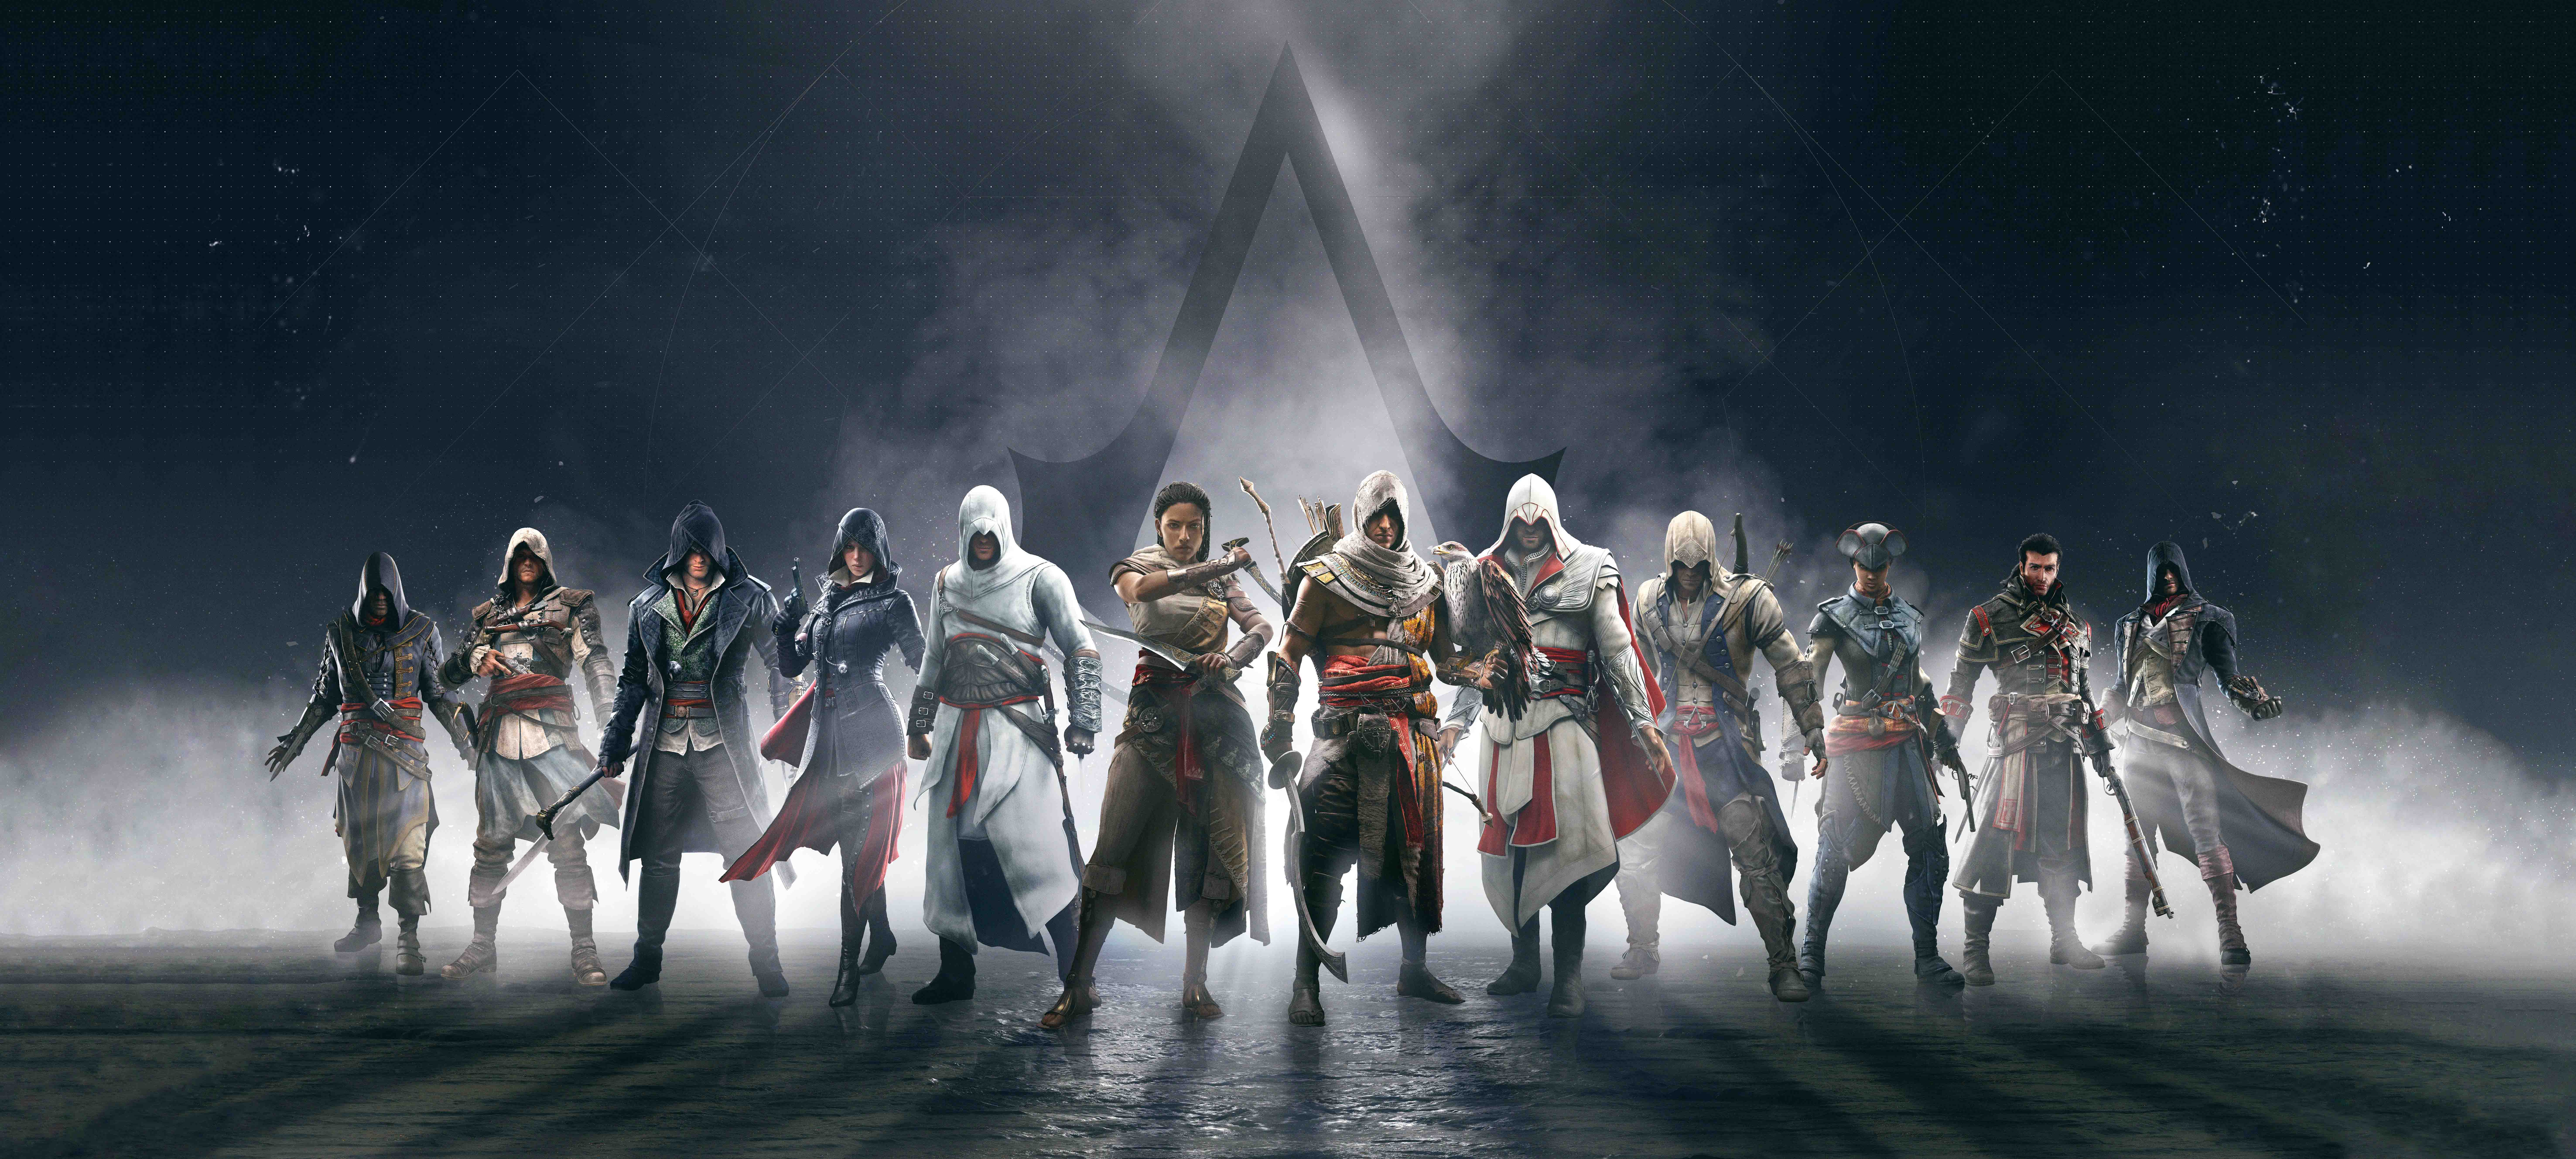 Assassin's Creed | Subsonic